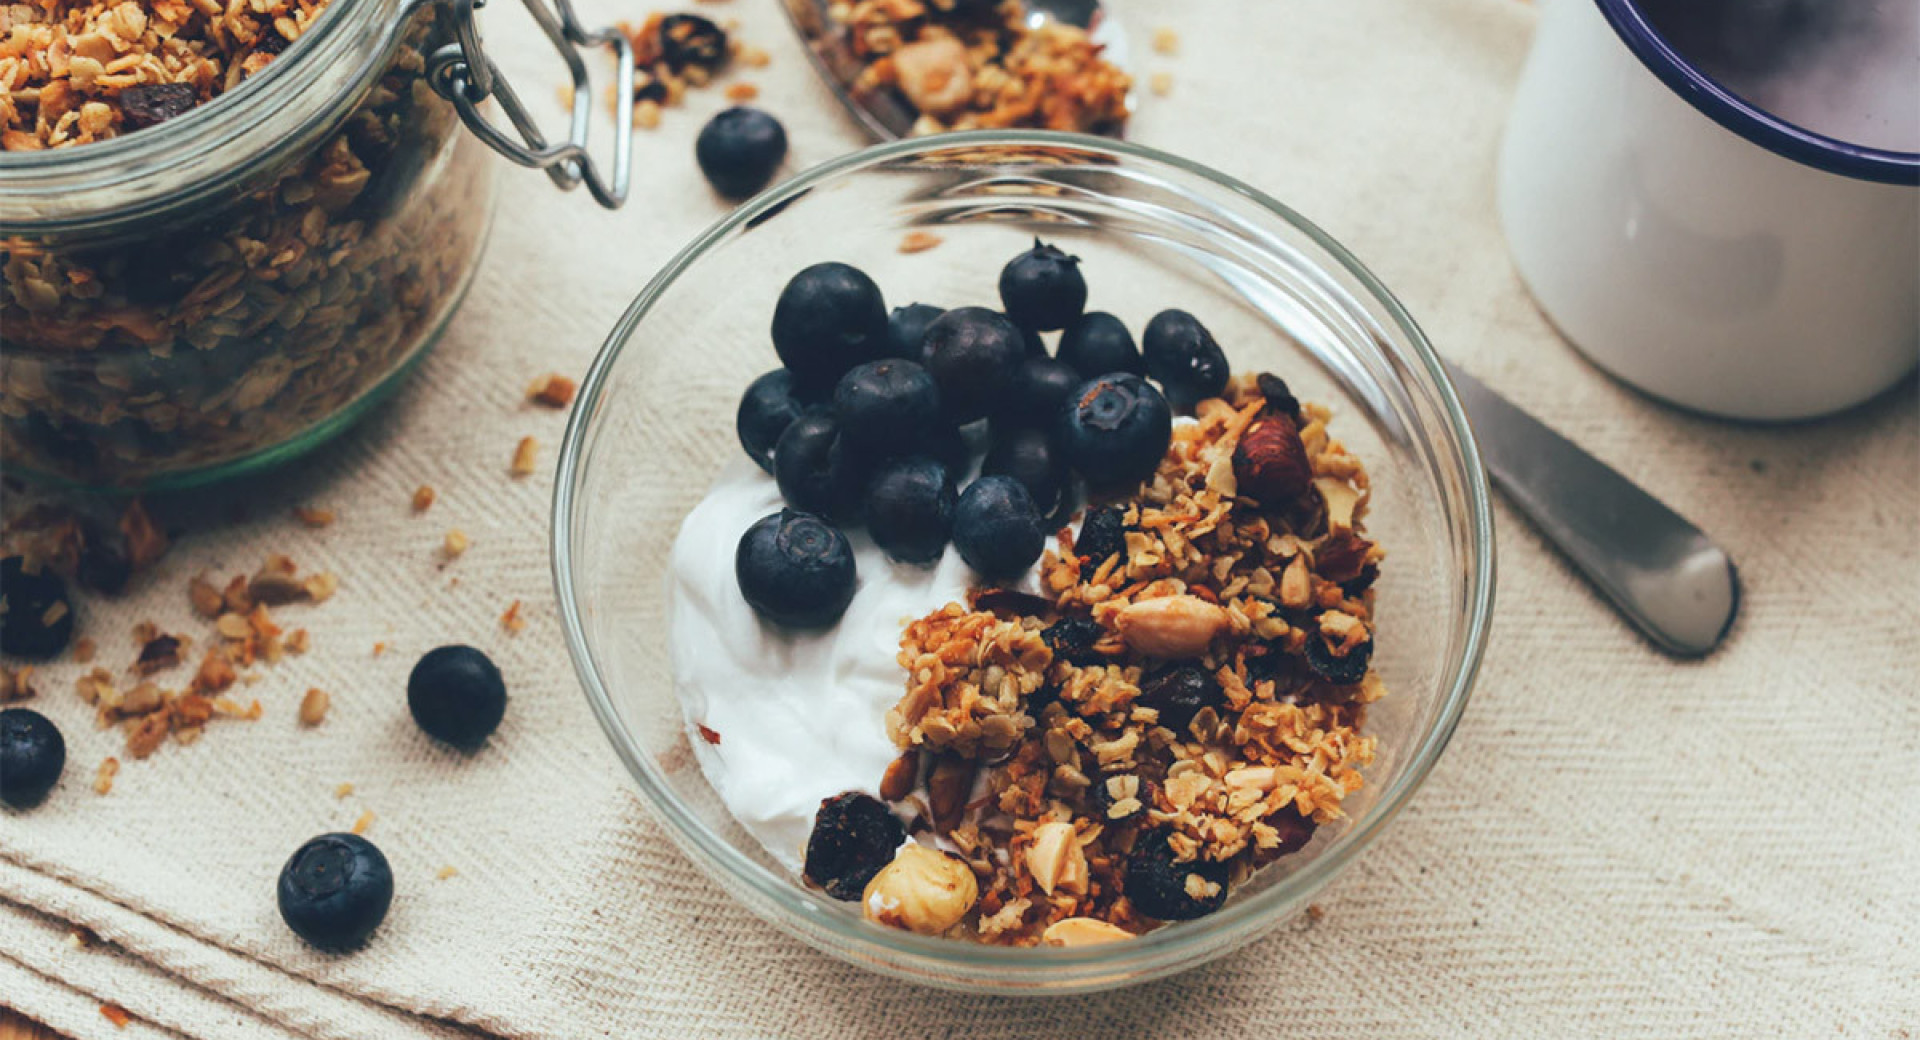 Granola in a glass jar, served with yogurt and blueberries. The jar is placed on a prepared table, with scattered cereal flakes and blueberries around.